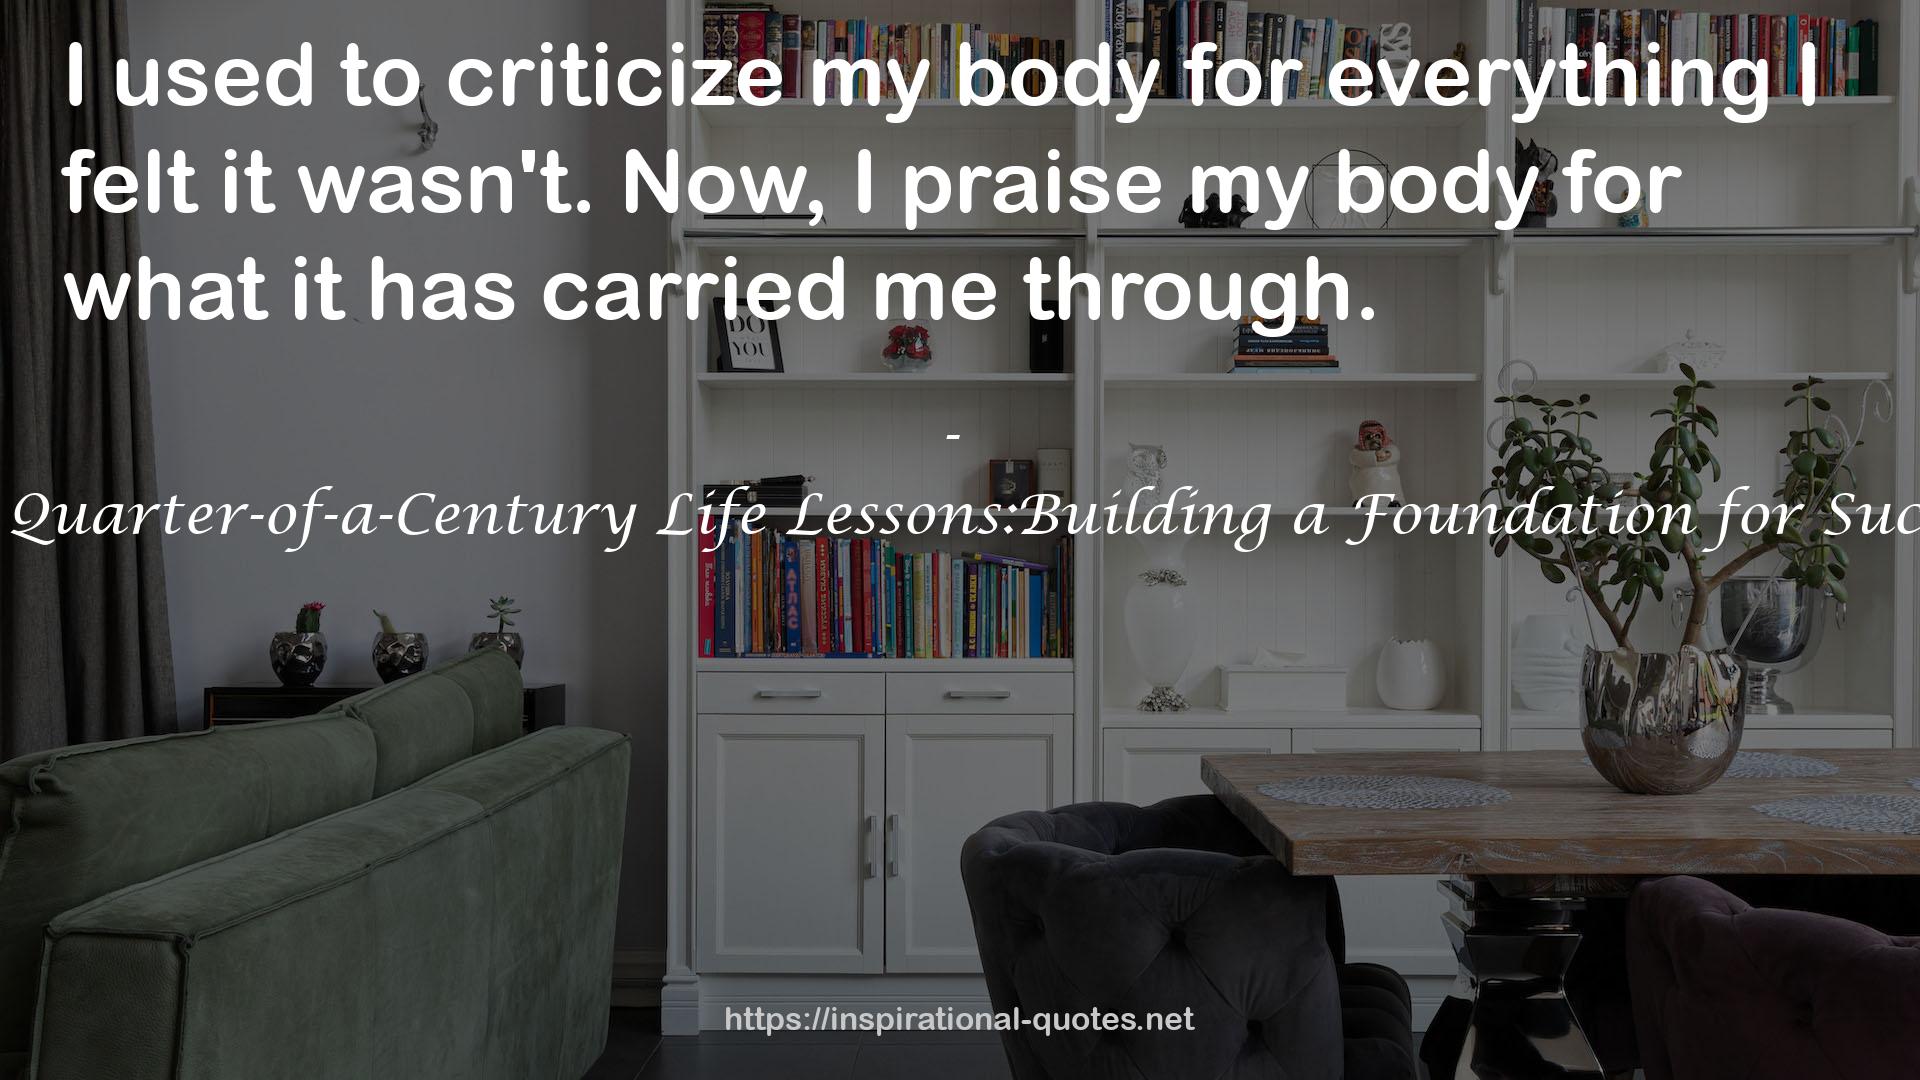 My Quarter-of-a-Century Life Lessons:Building a Foundation for Success QUOTES